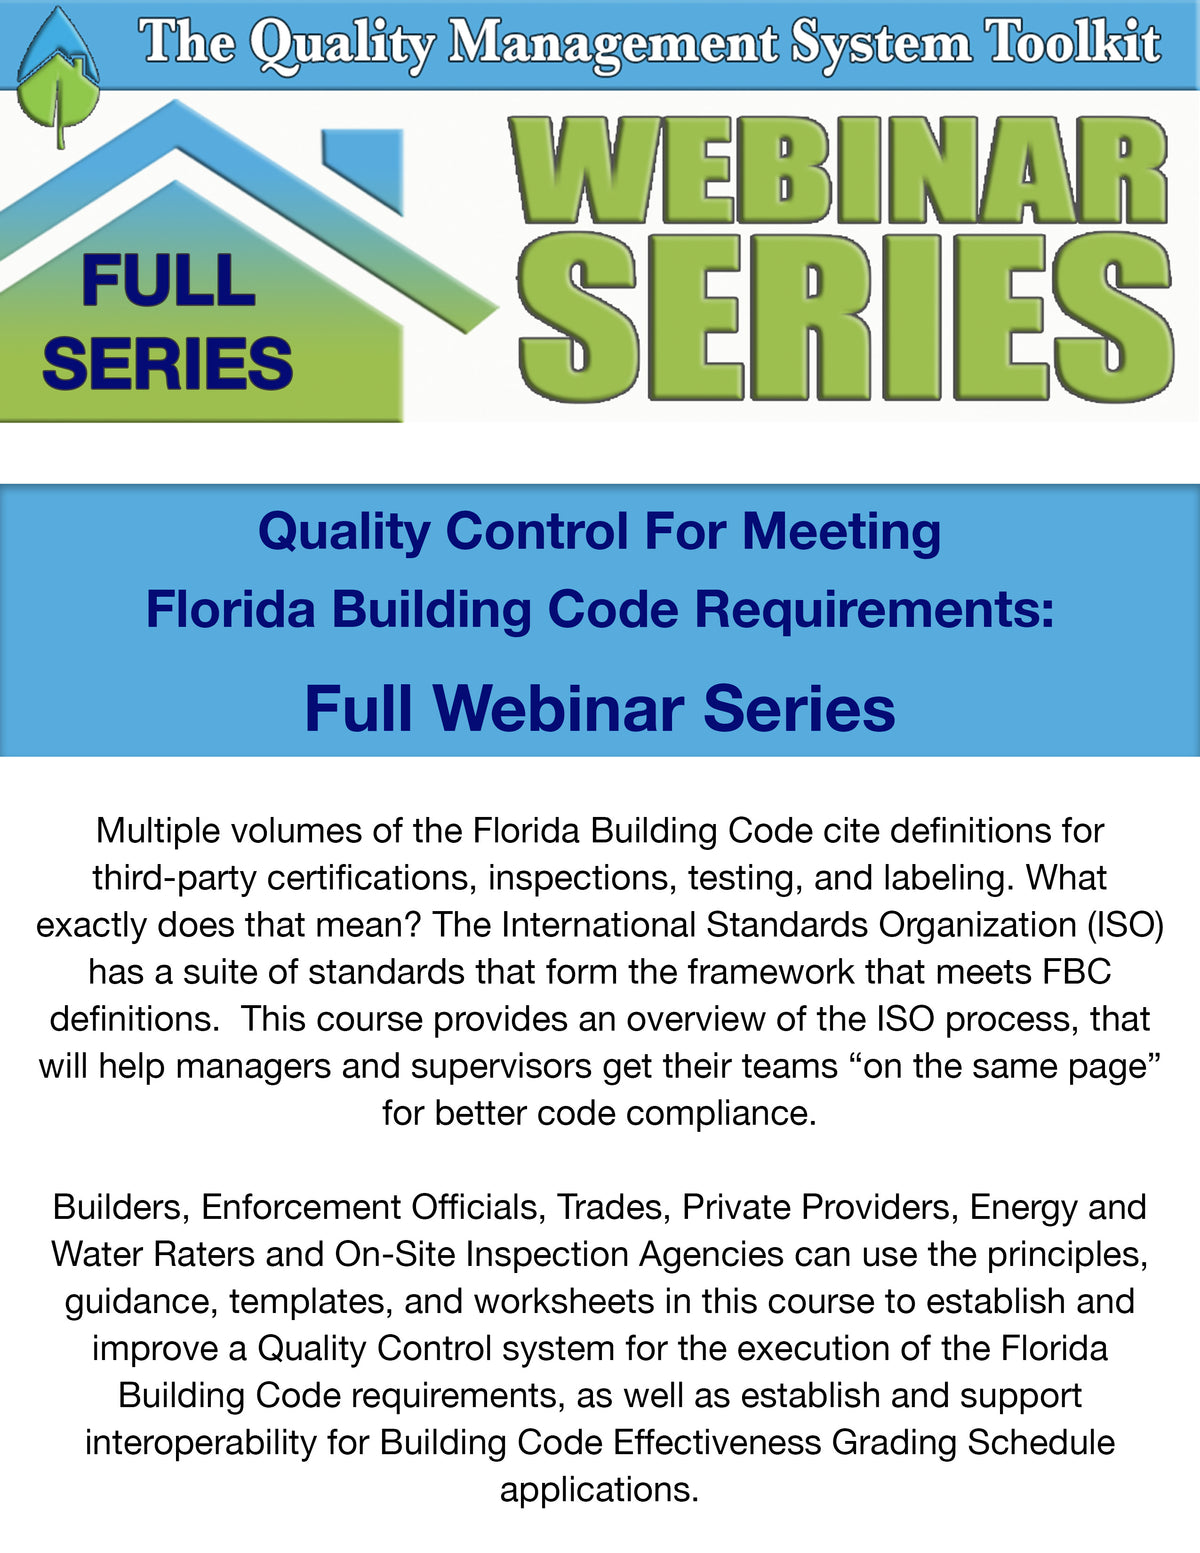 The Quality Management System Toolkit: Full Webinar Series